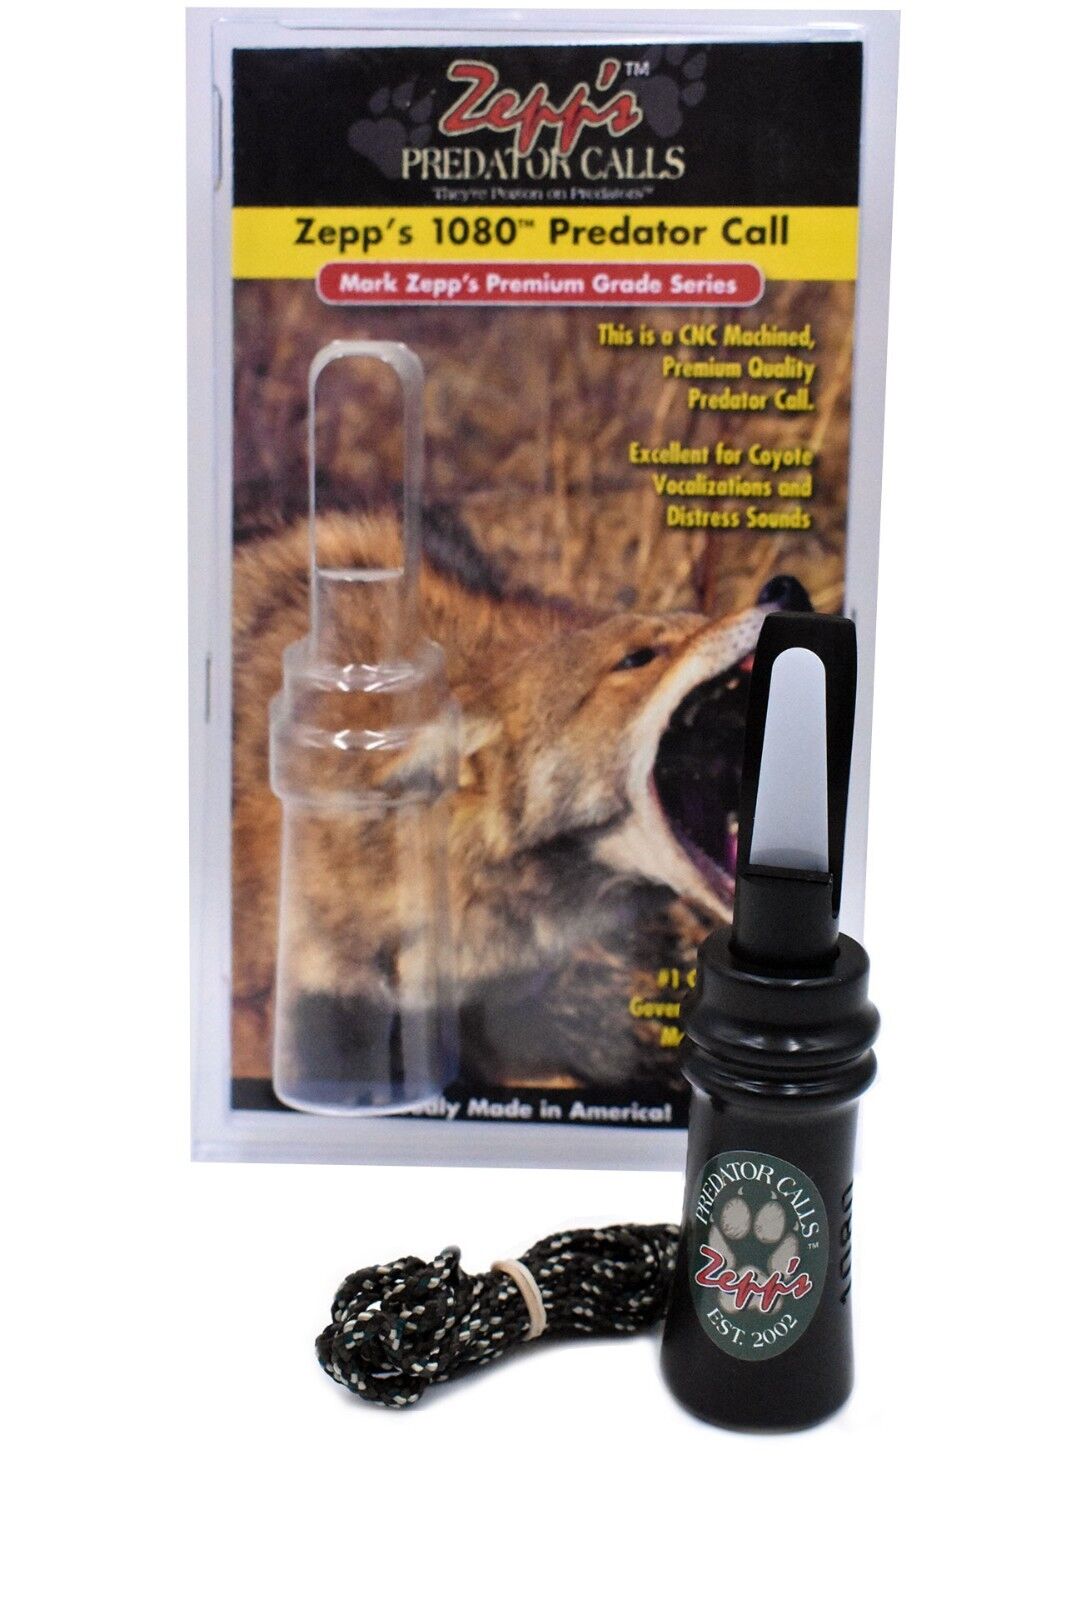 Zepp's Predator Calls and Squallers for Coyotes, Fox, Big Cats, Lions and More